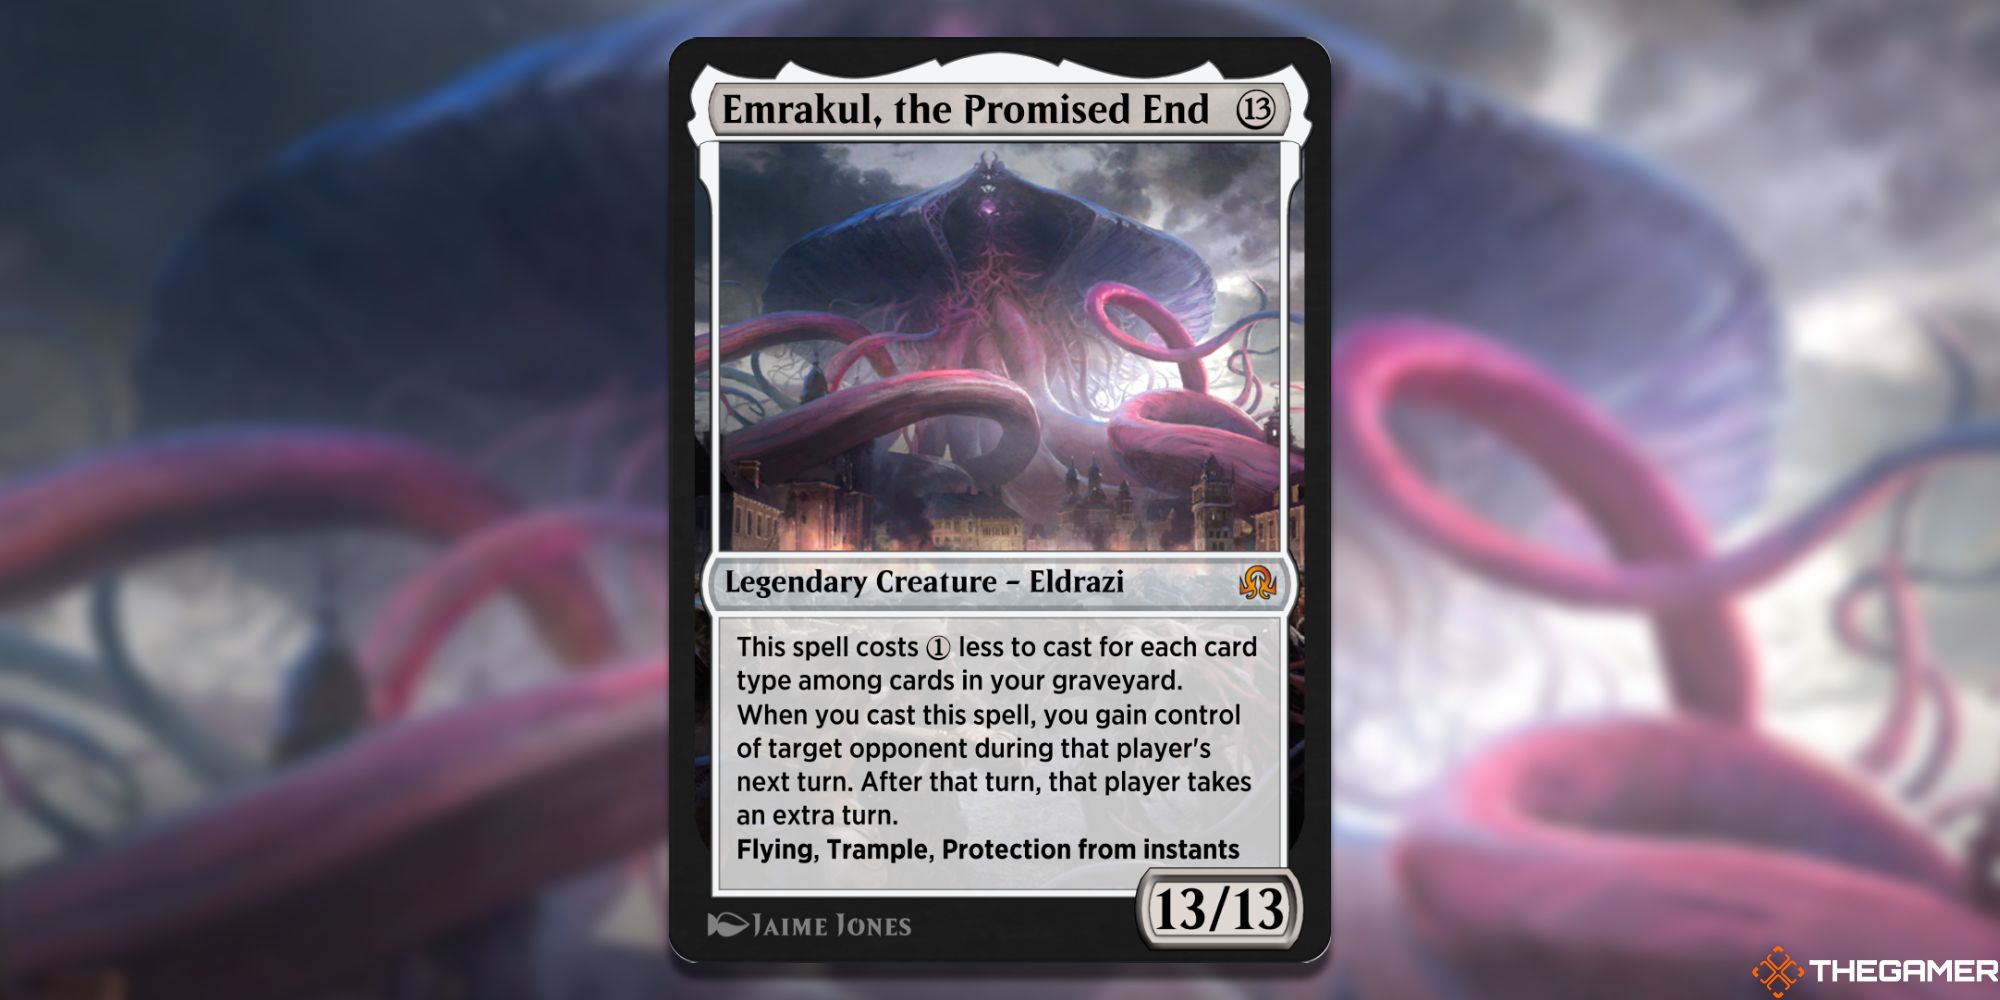 Image of Emrakul the Promised End card in Magic: The Gathering, with artwork by Jamie Jones